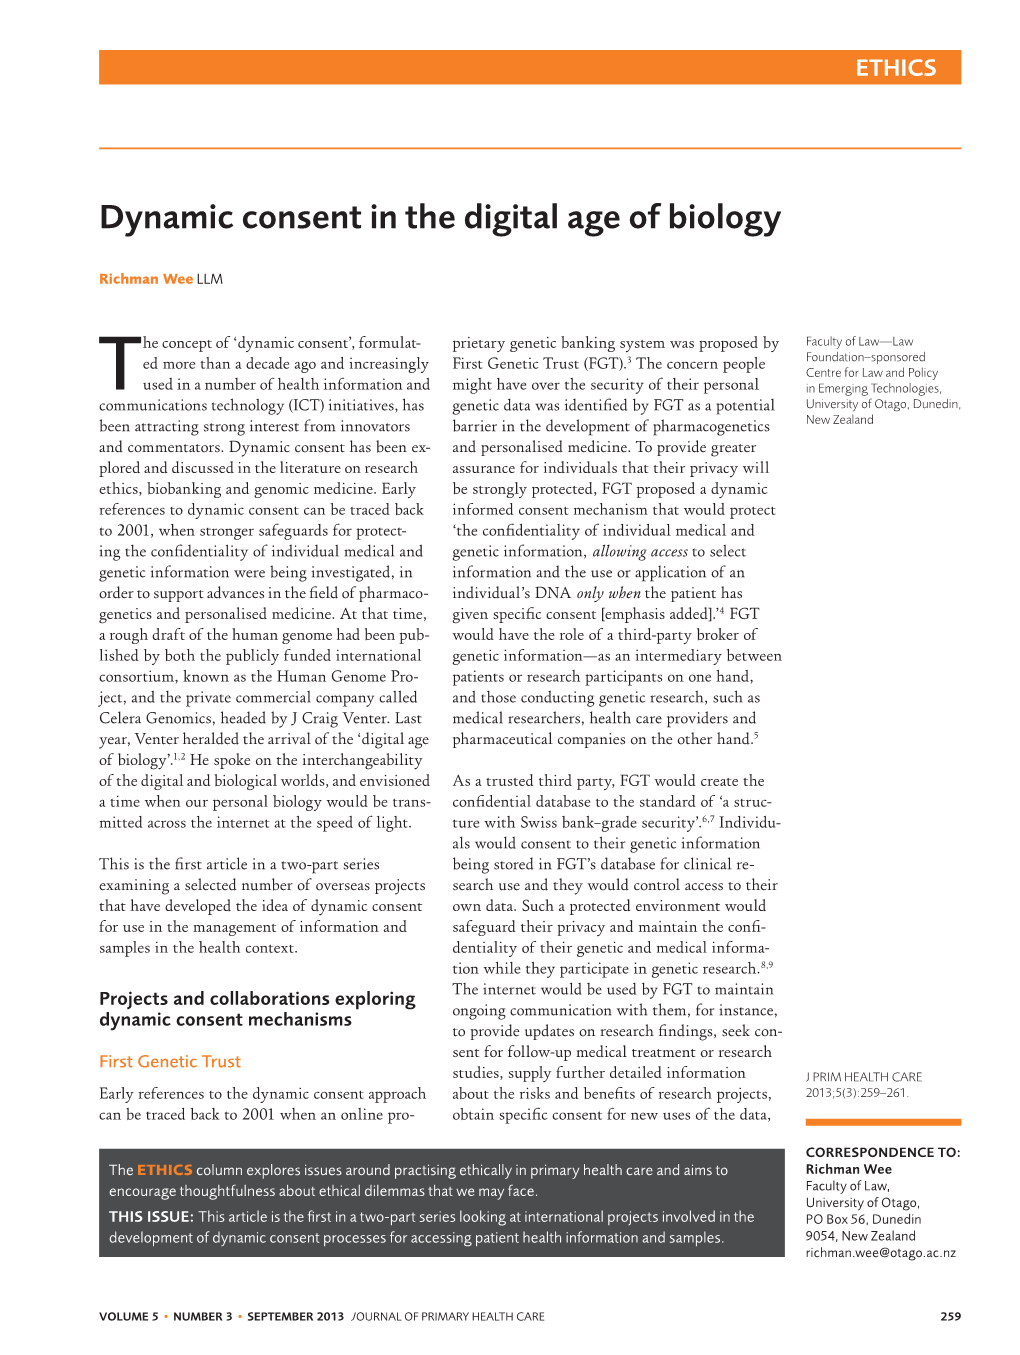 Dynamic Consent in the Digital Age of Biology